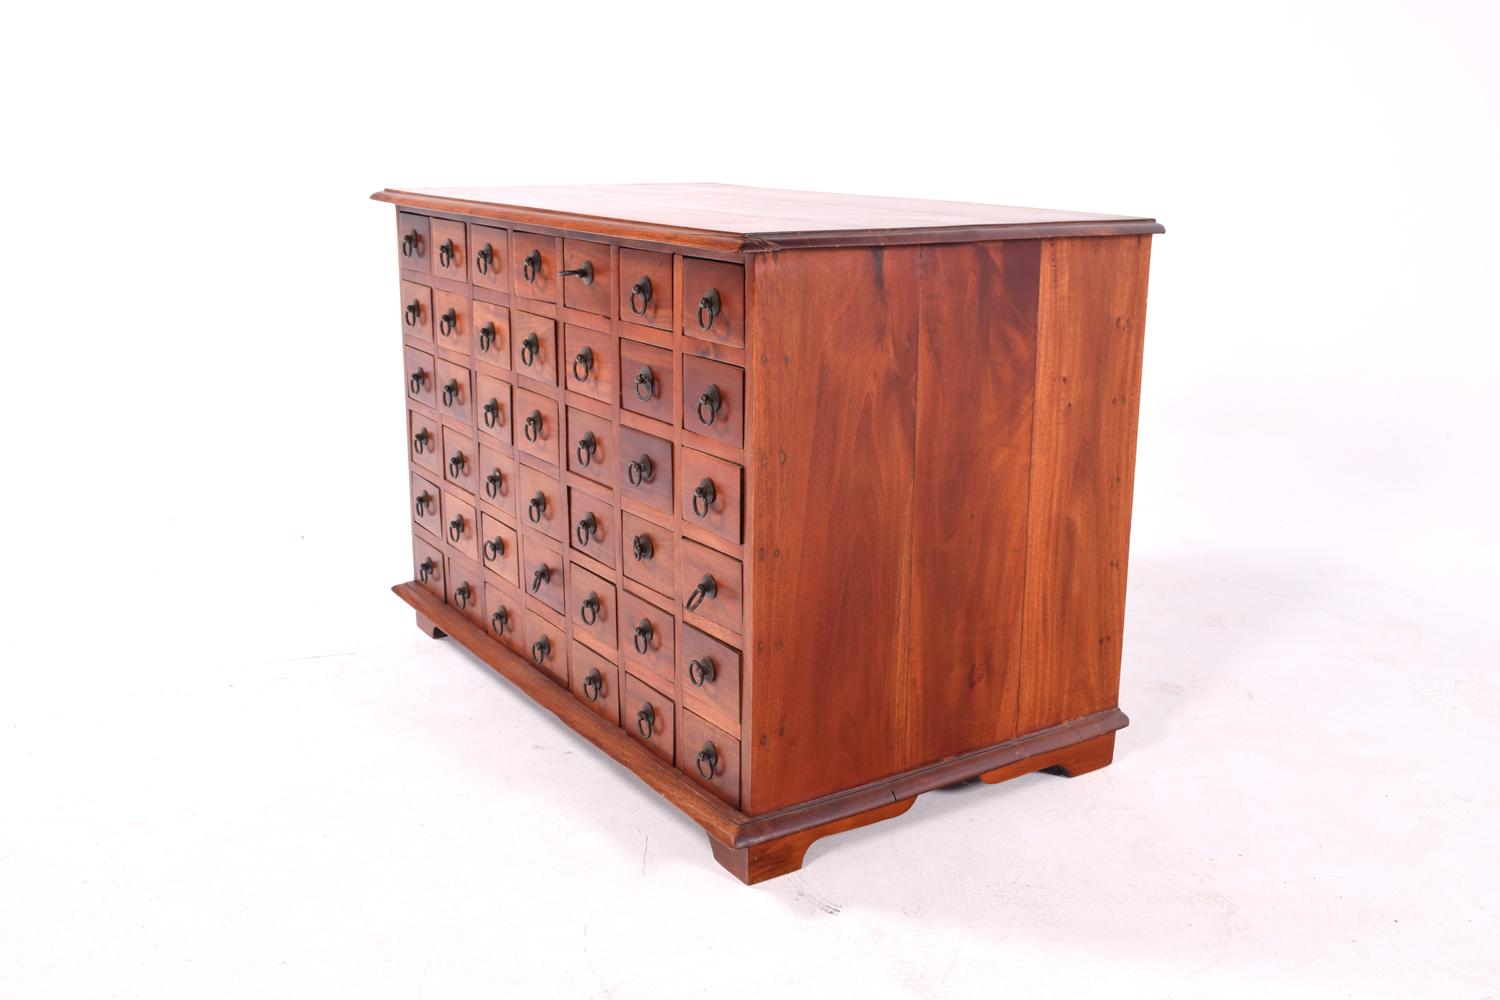 A stunning 42 drawers apothecary cabinet, in mahogany. The chest features a nice subtle Asian design in mahogany wood. Original metallic hardware.